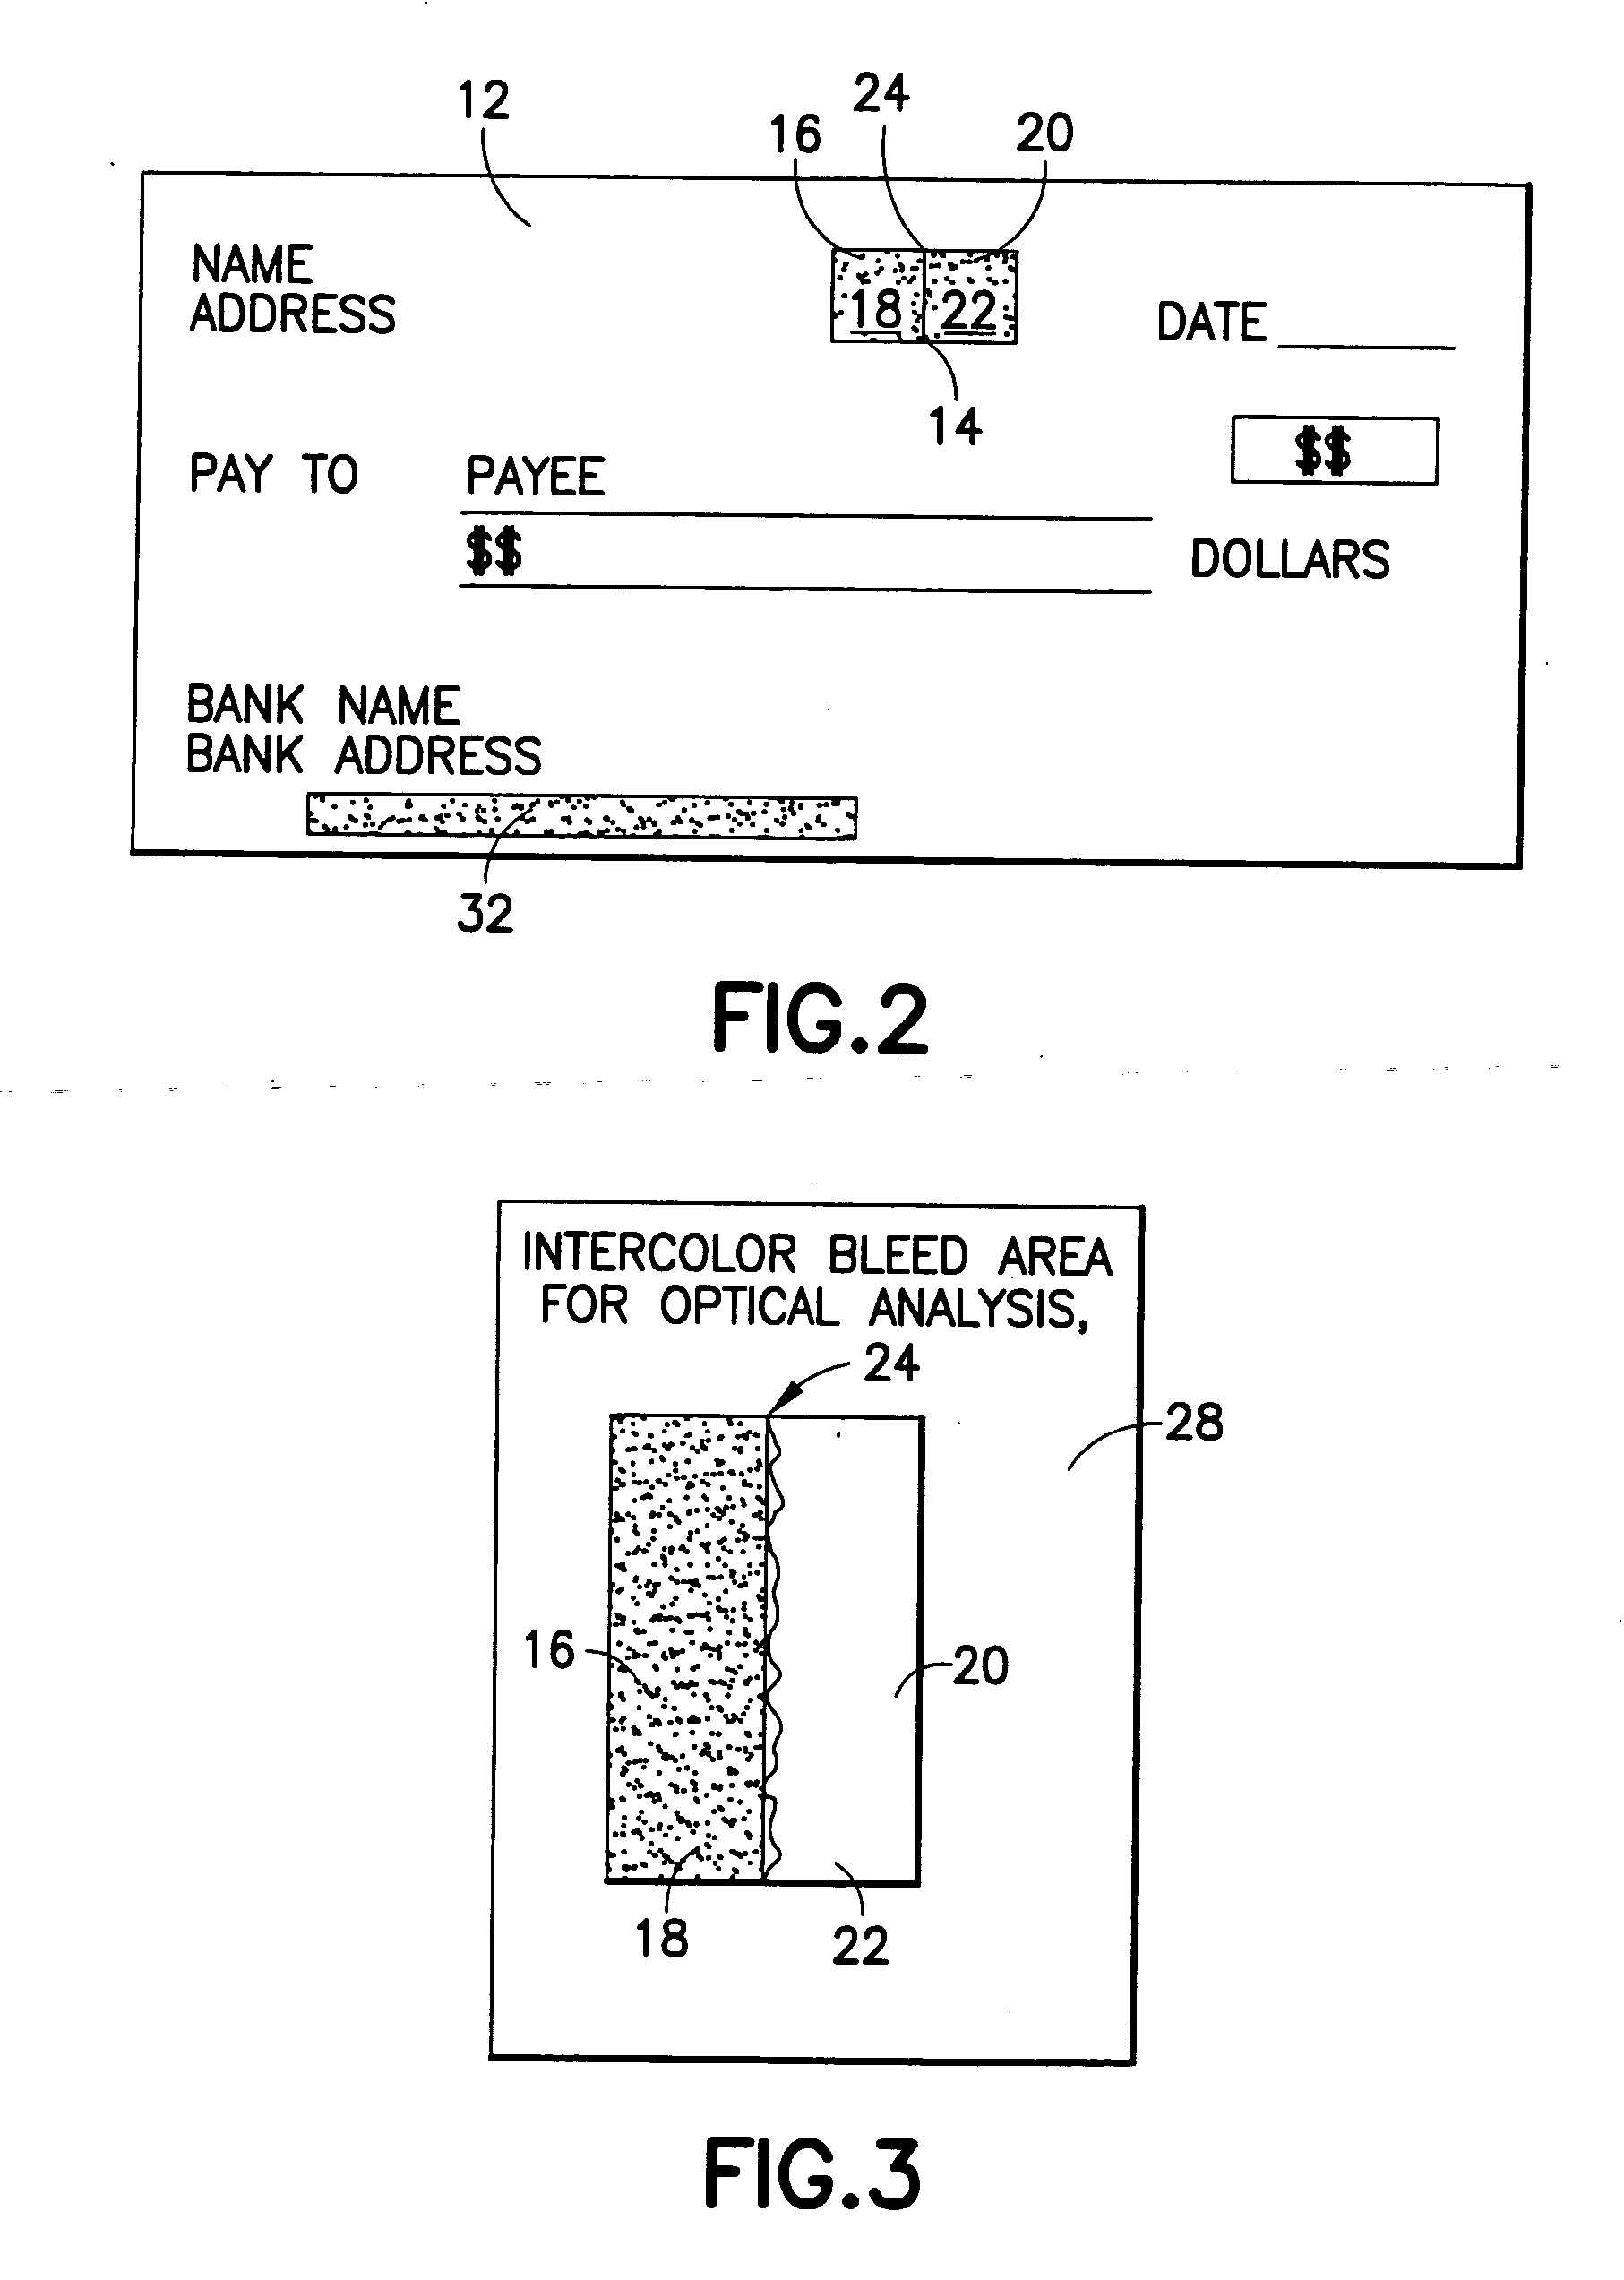 Method for creating self-authenticating documents